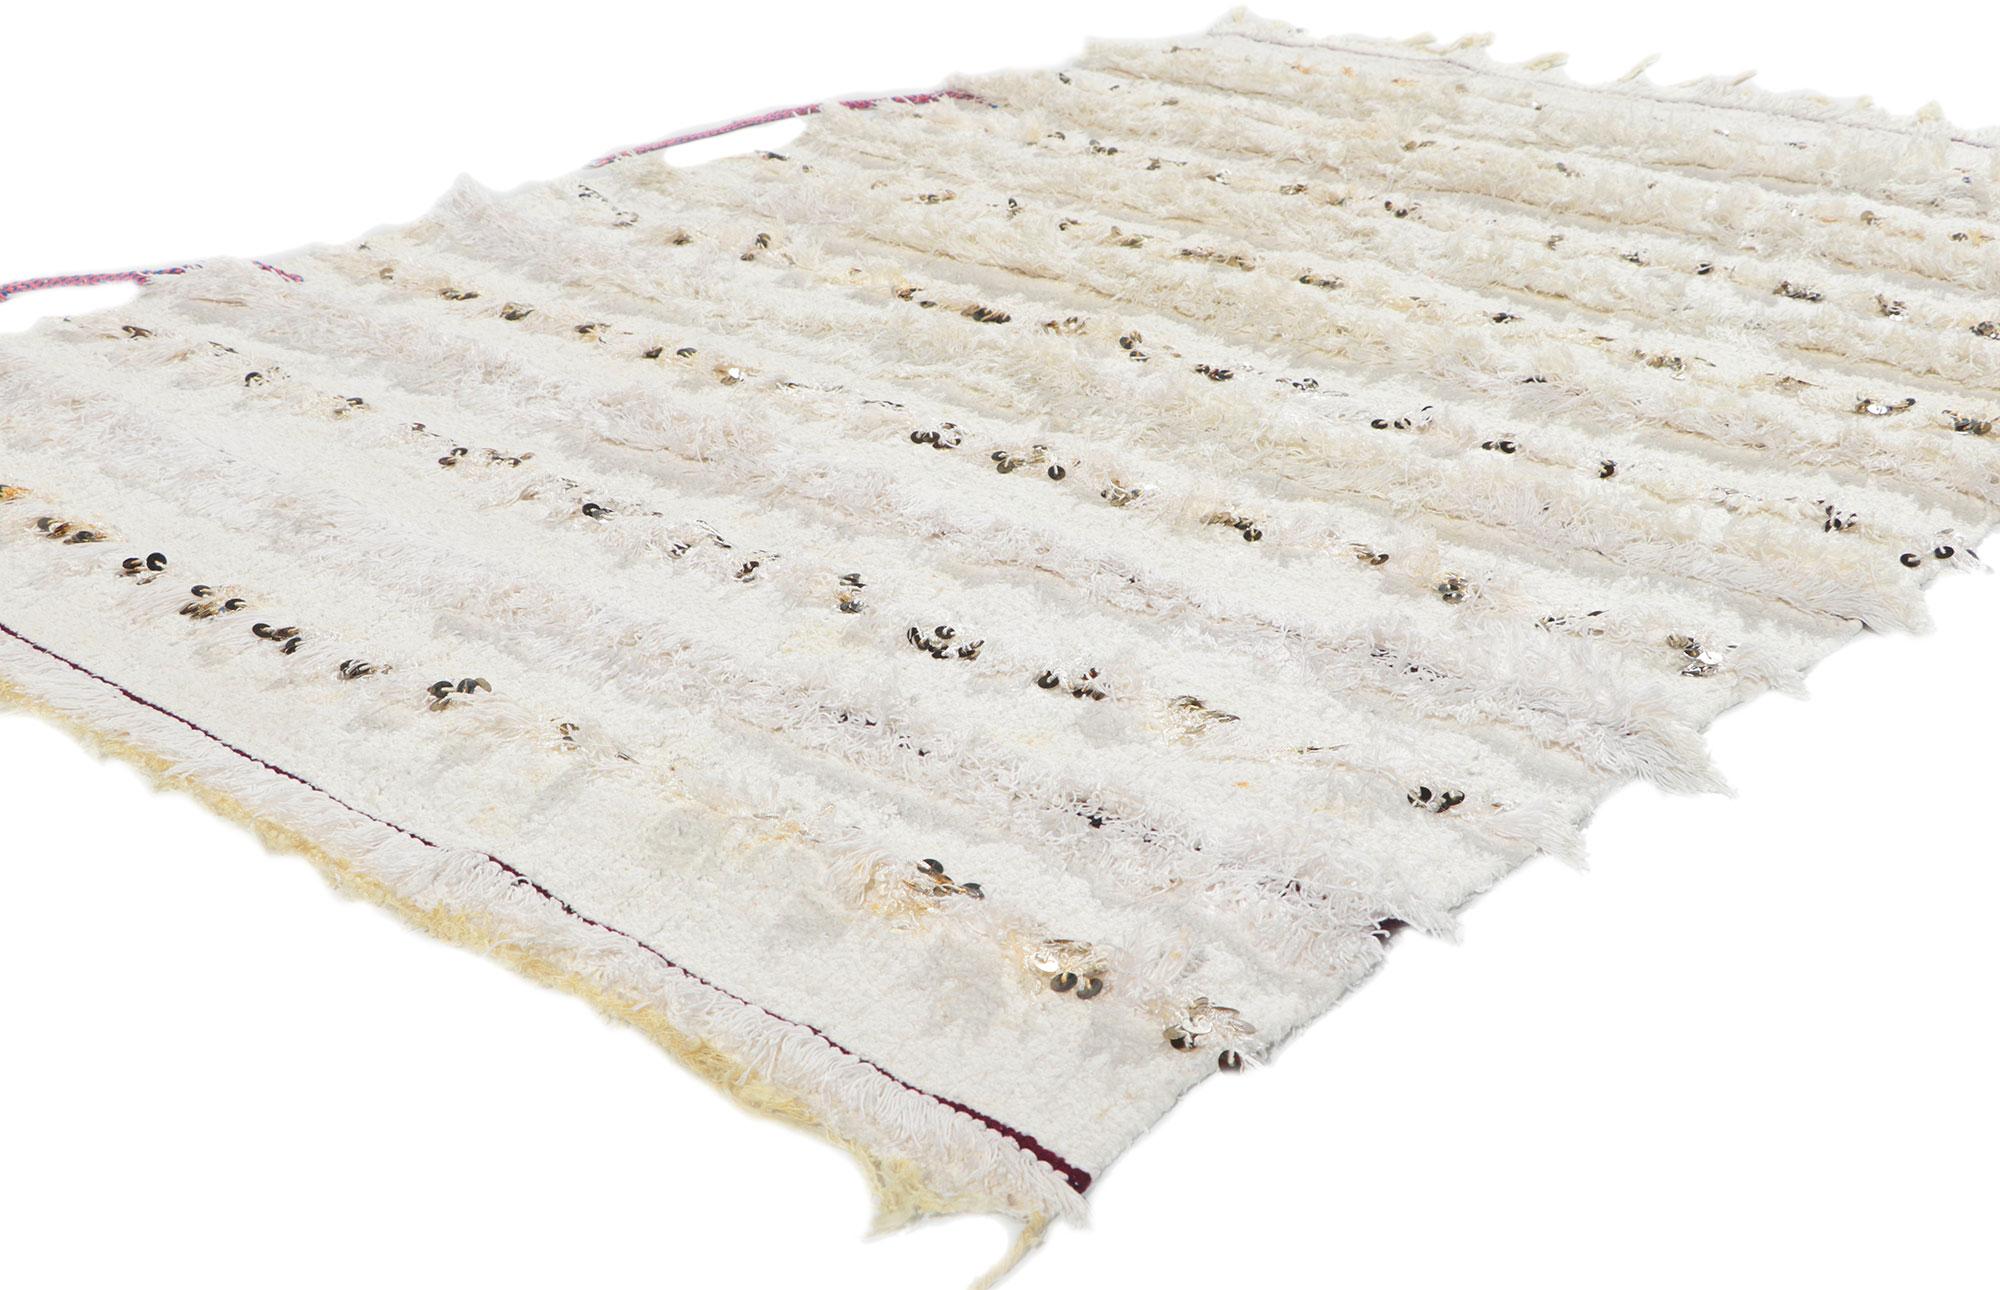 78403 vintage Moroccan wedding blanket, 04'03 x 06'06. This handwoven wool vintage Moroccan Wedding Blanket also known as a Berber Tamizart Handira features rows of fluffy fringe decorated with paillette sequins. The underside of this vintage